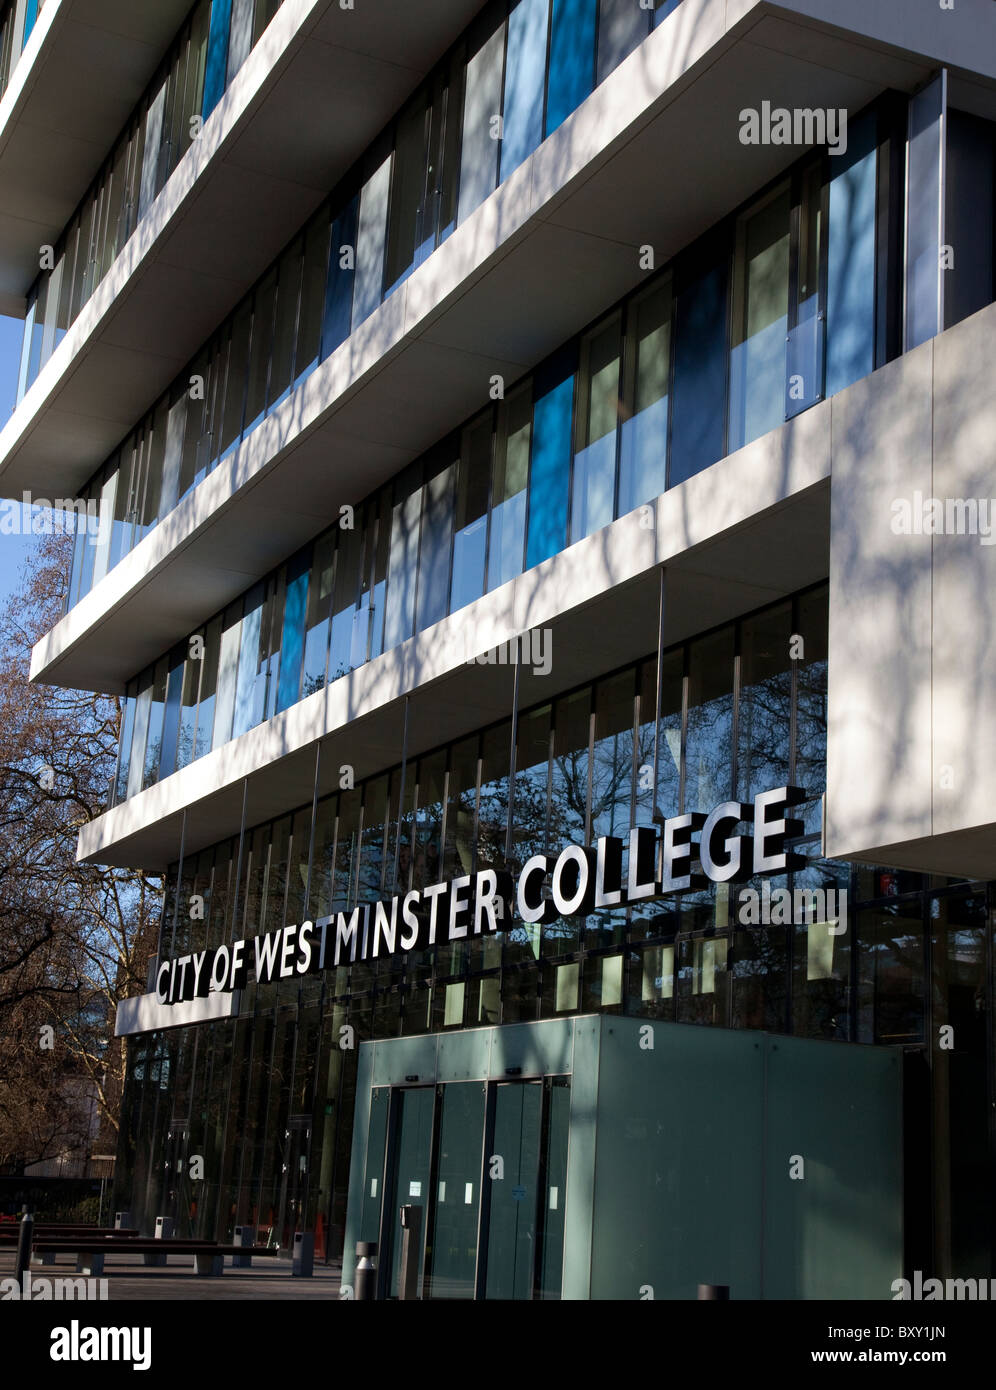 City Of Westminster College 15